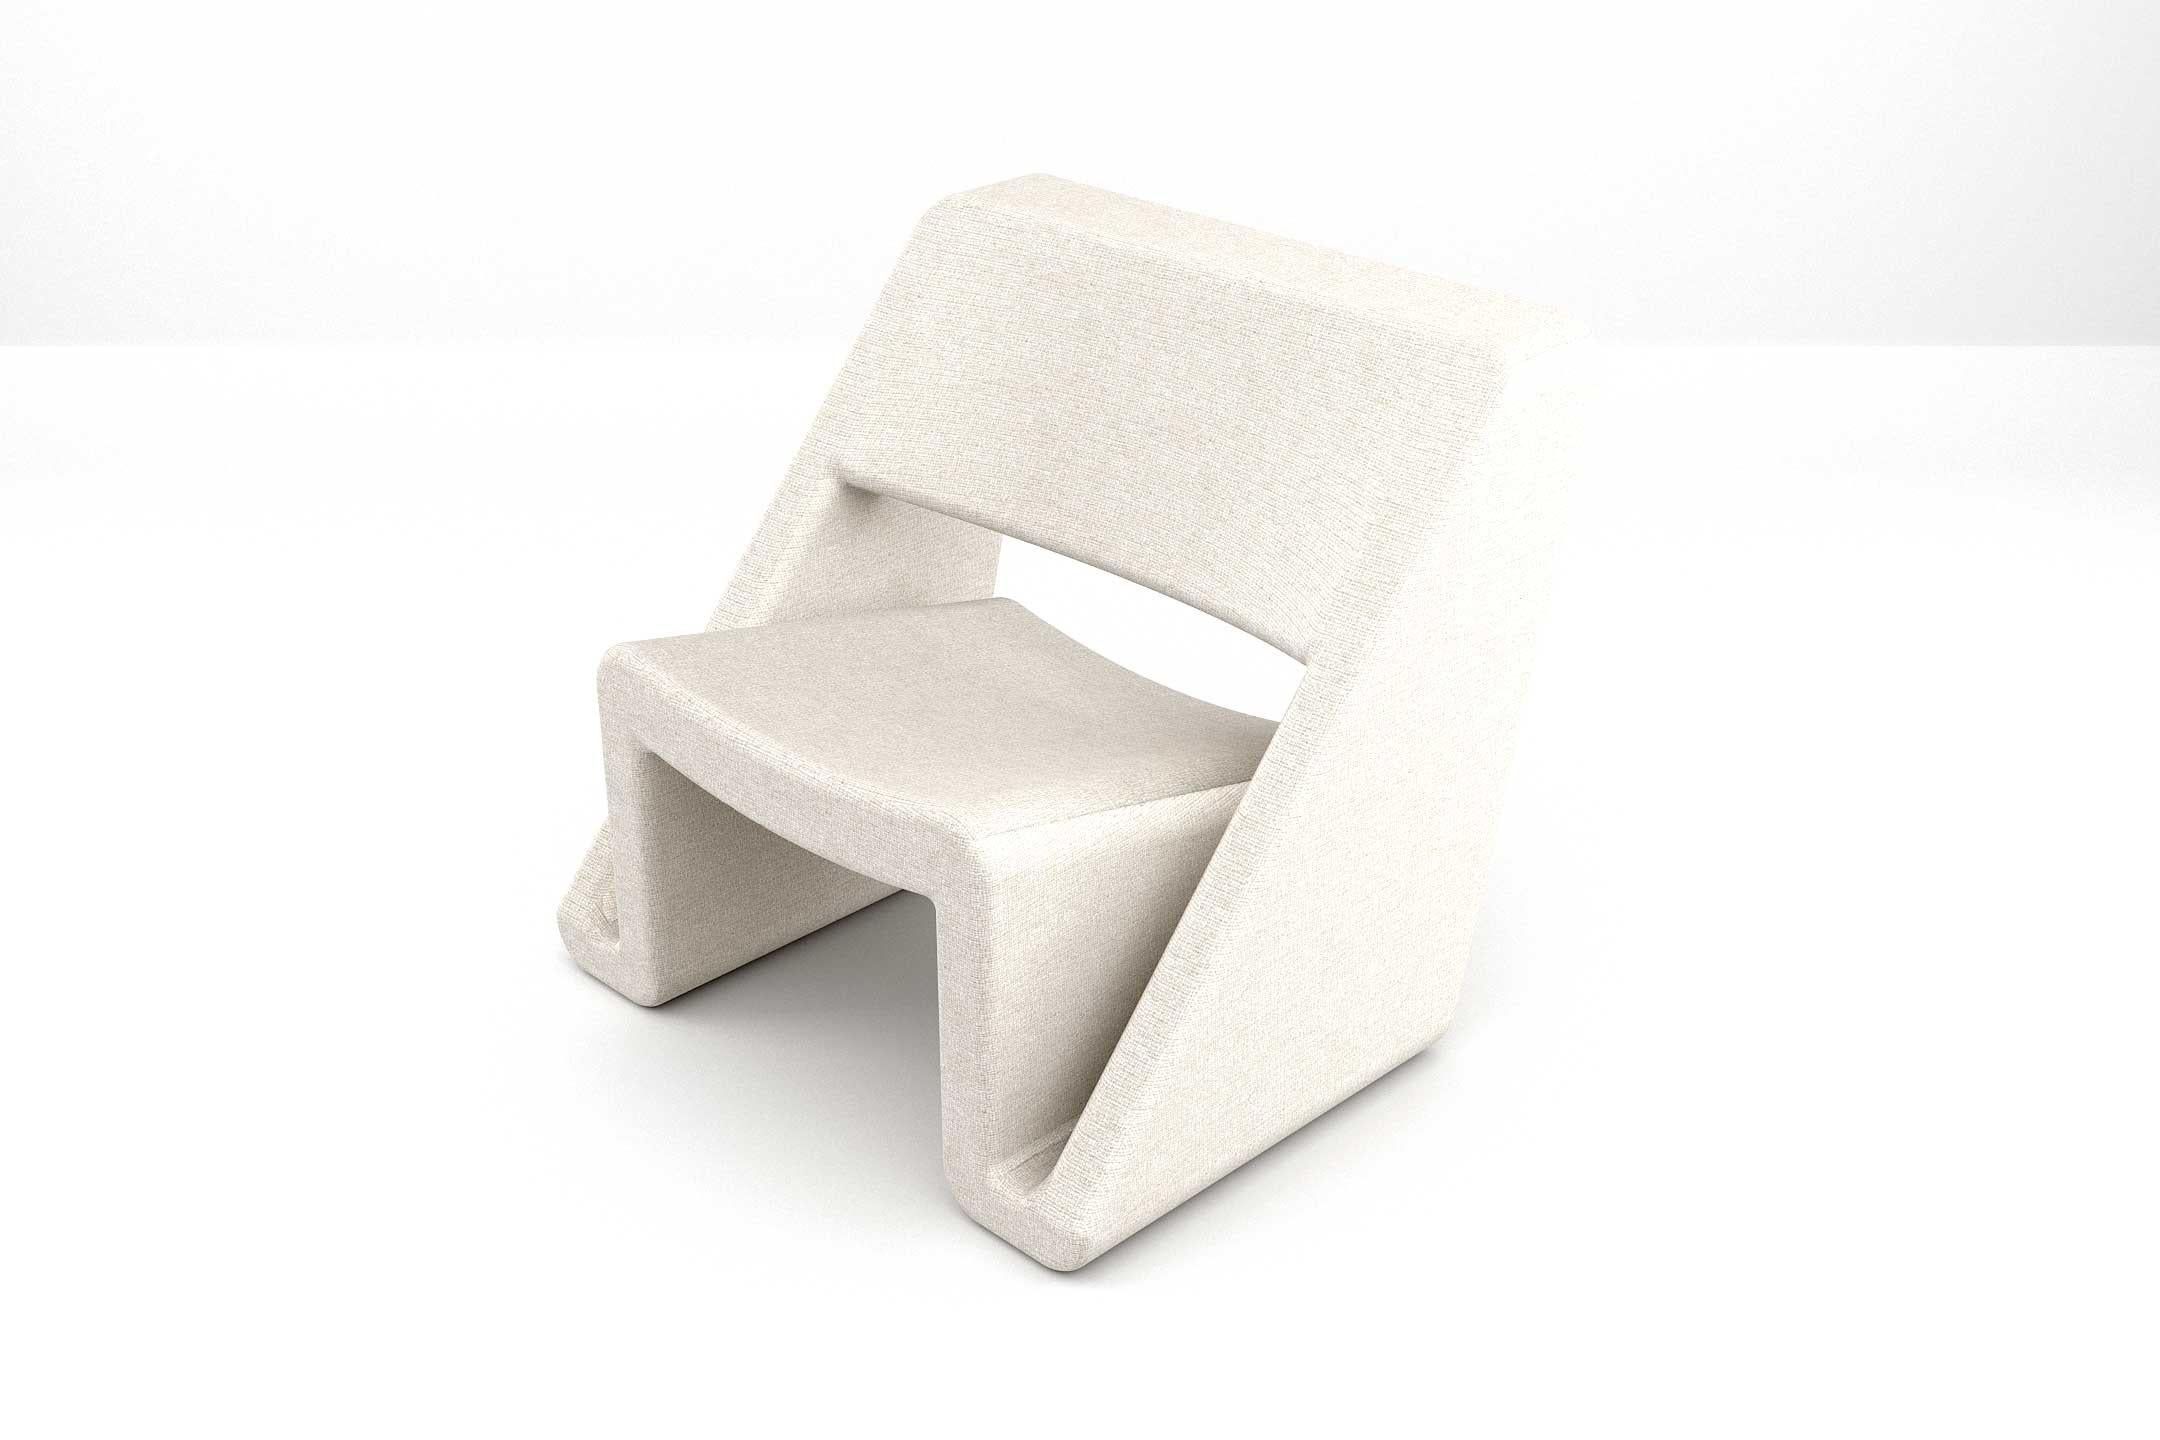 Contemporary Jet Armchair - Modern White Upholstered Armchair For Sale